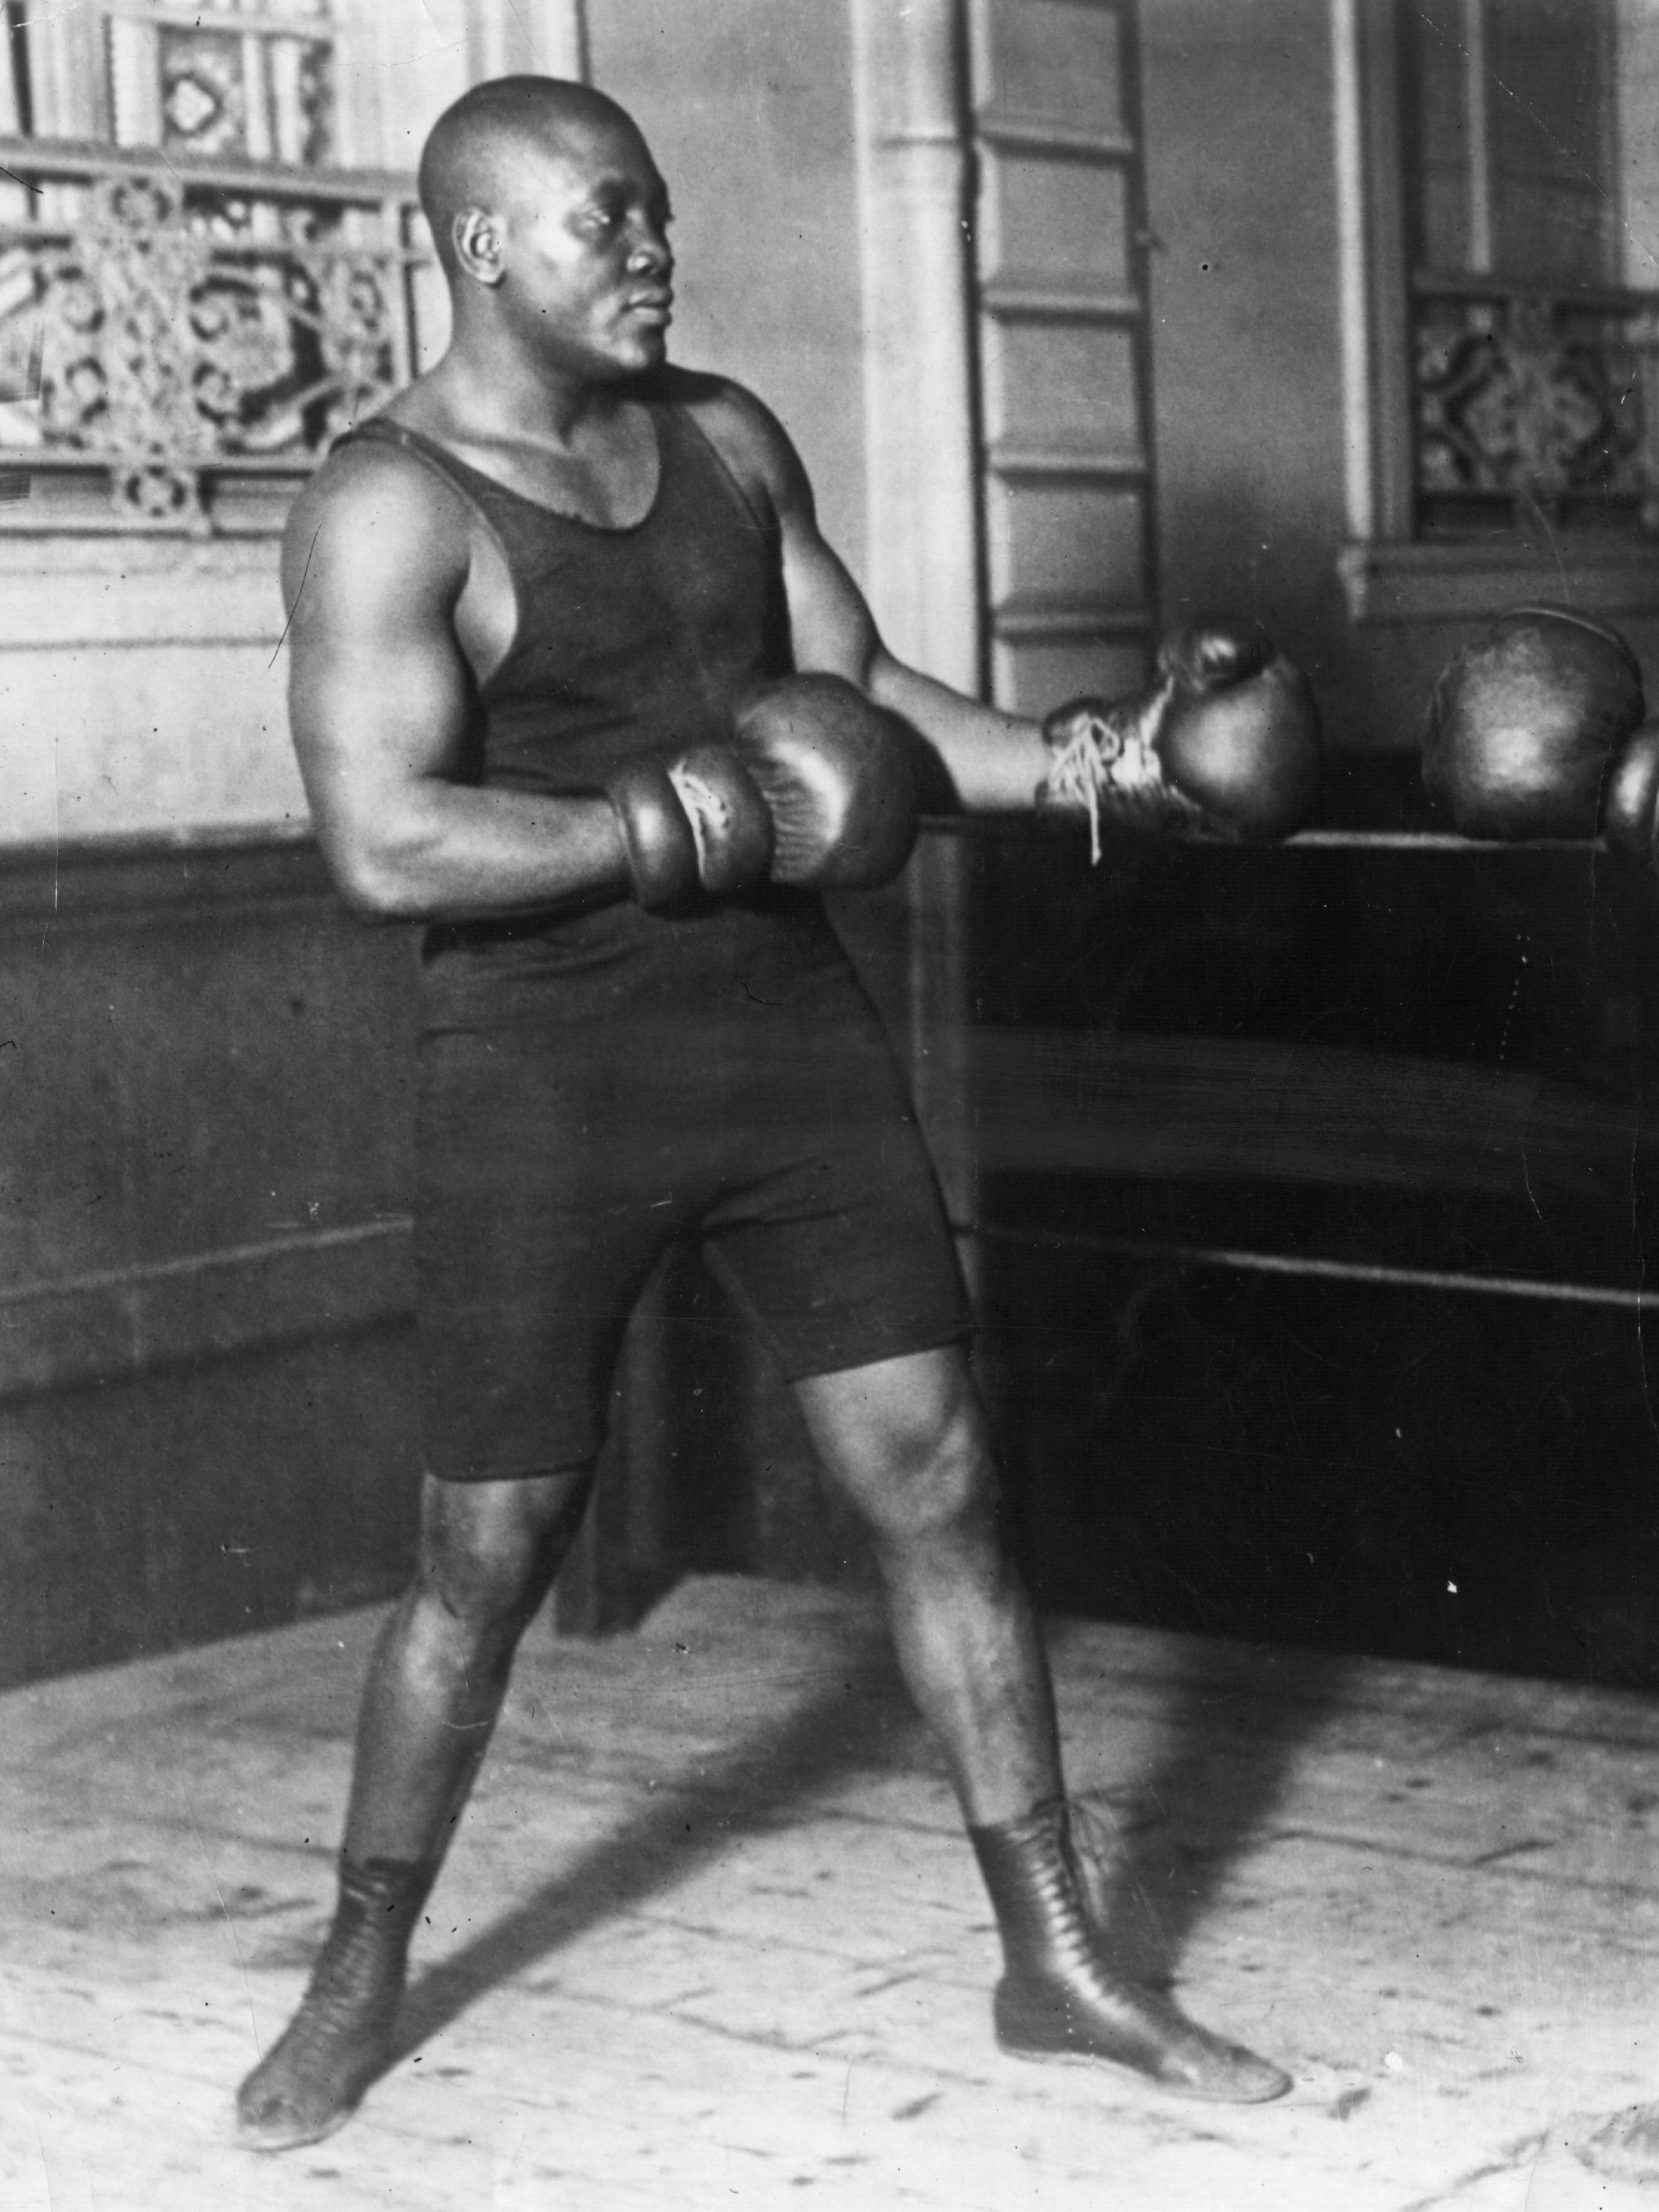 American heavyweight boxer Jack Johnson in action sparring.  (Photo by Topical Press Agency/Getty Images)